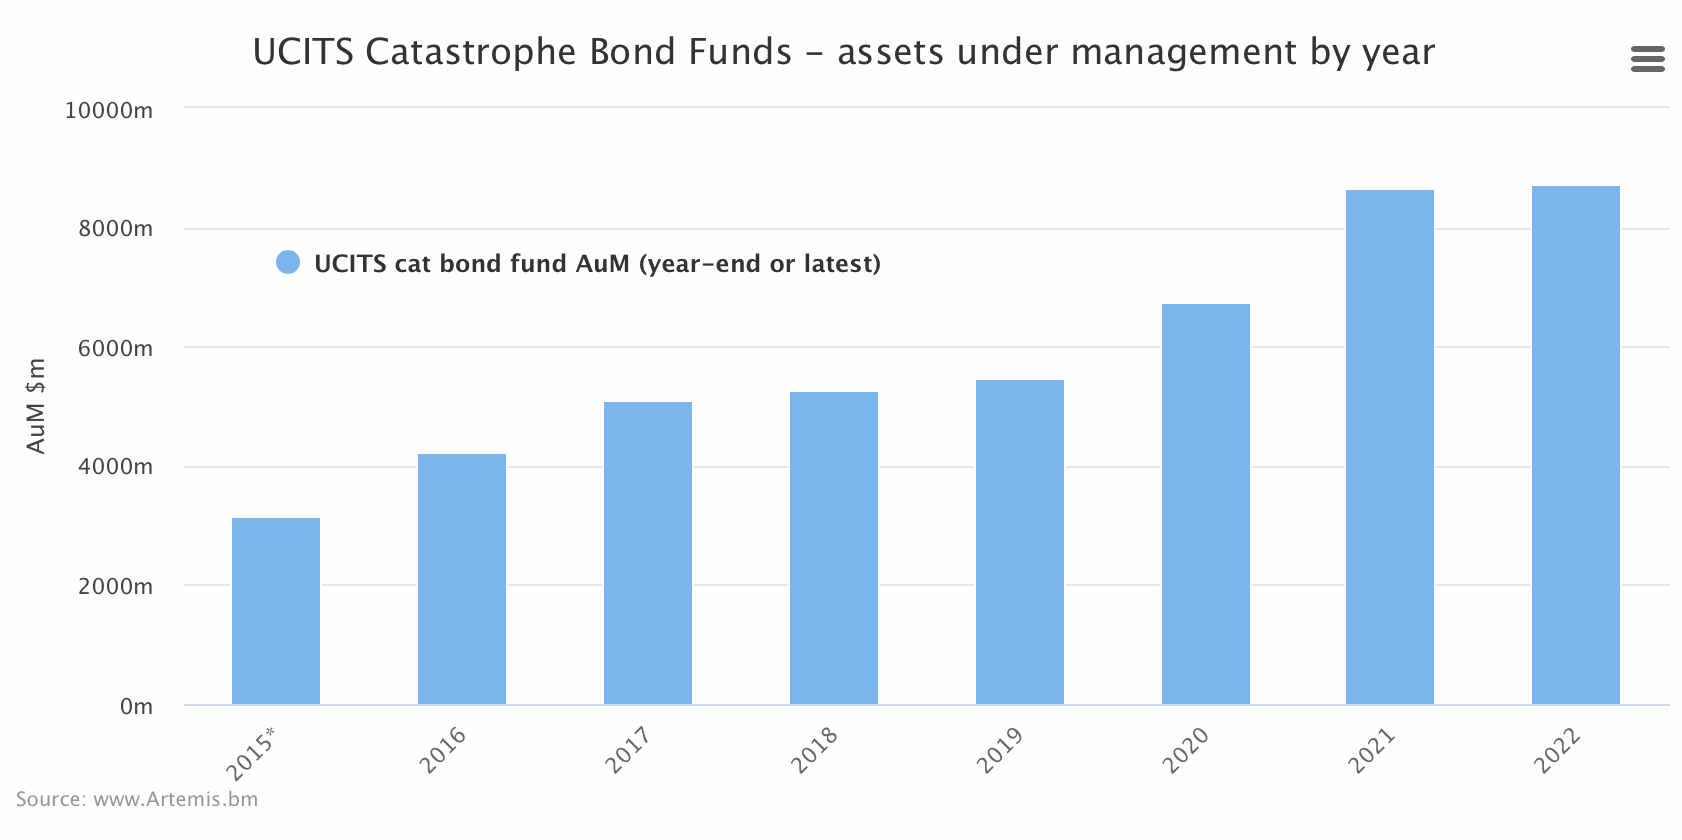 UCITS catastrophe bond fund assets at Q1 2022